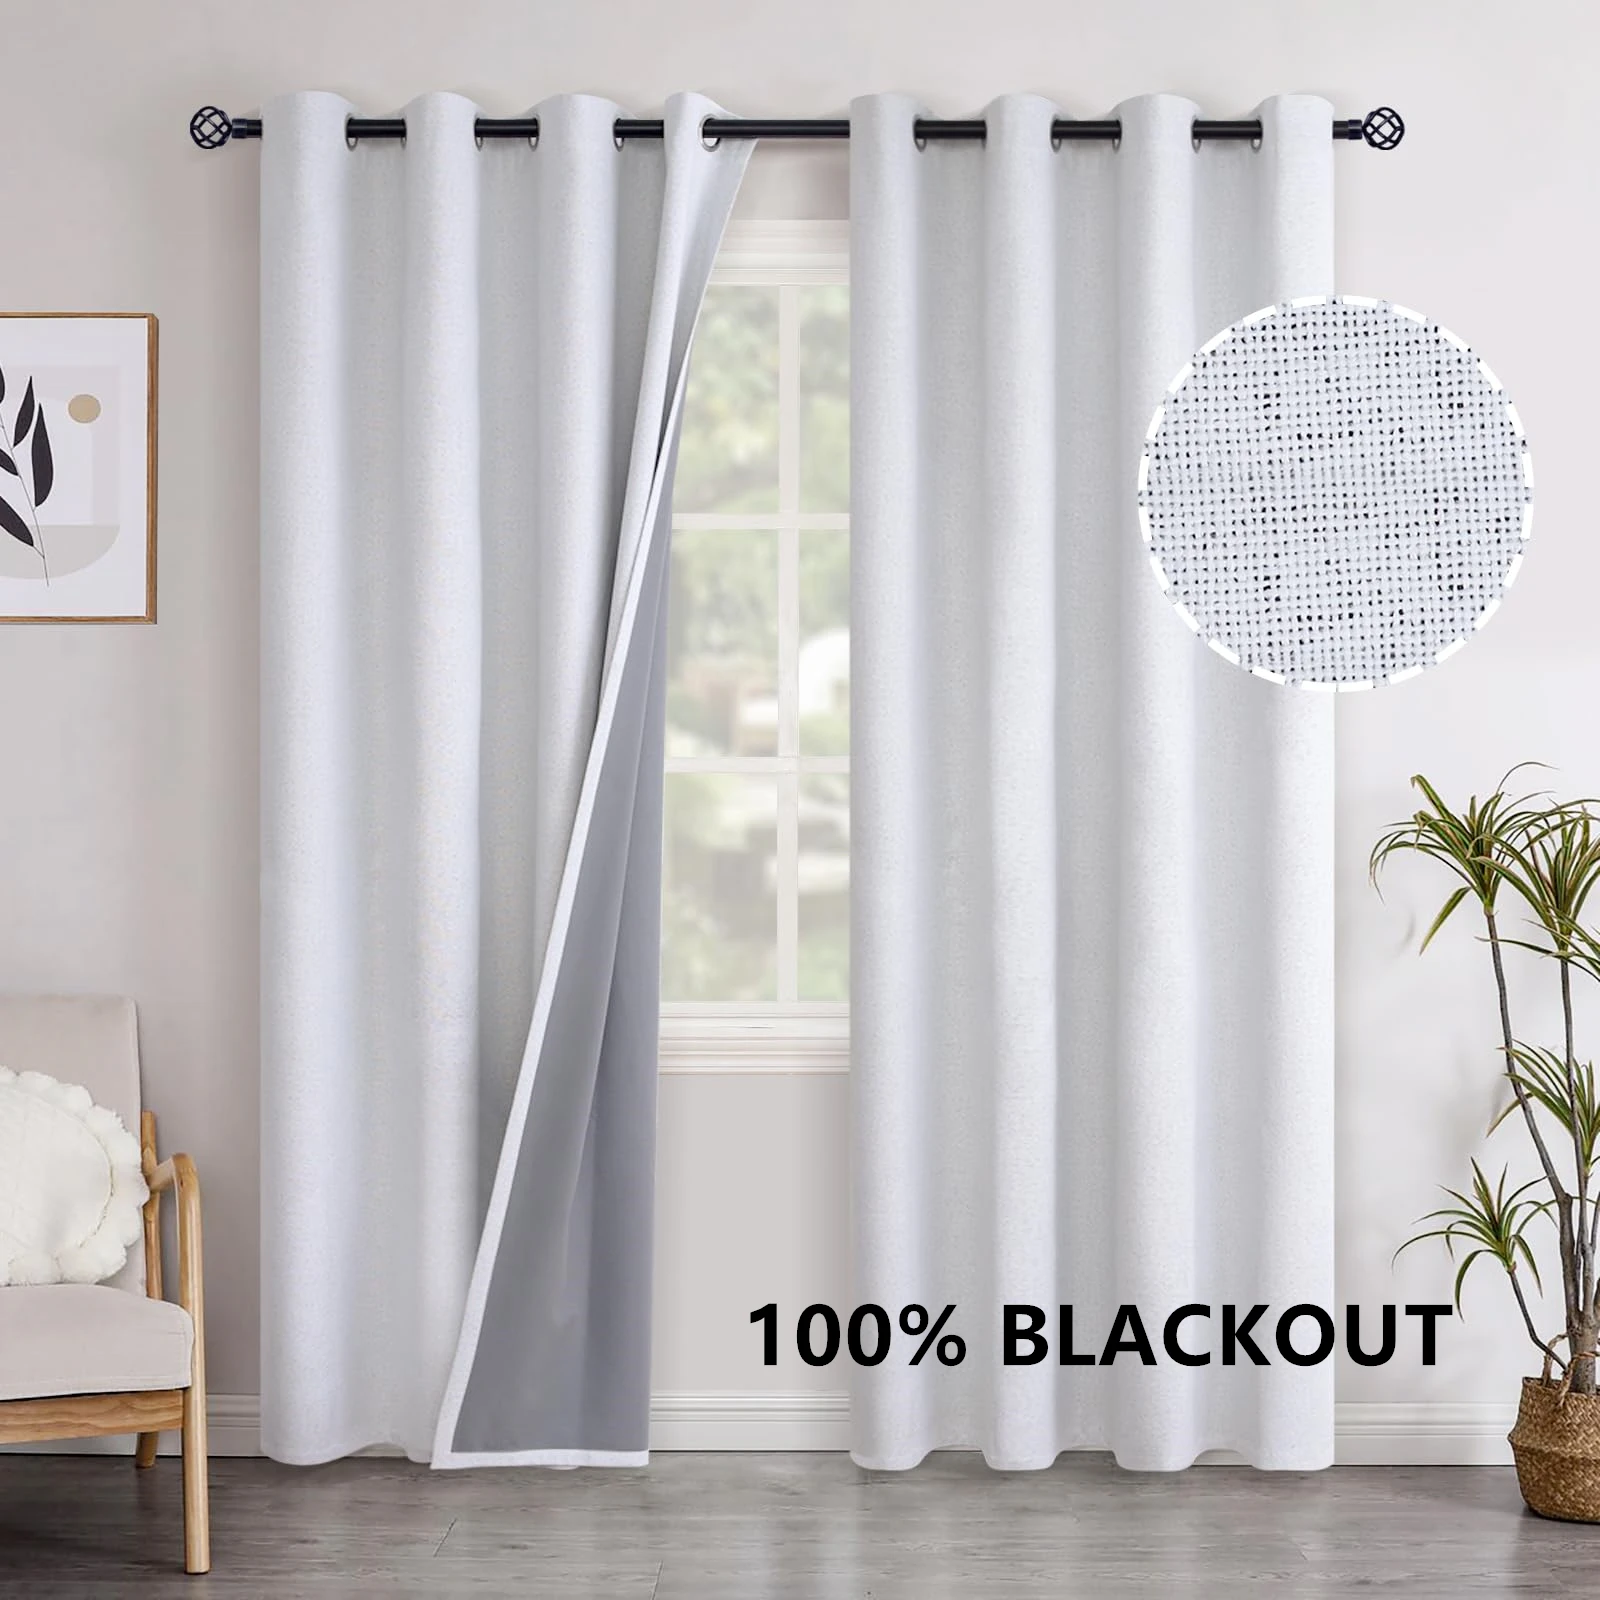 

310cm Height 100% Blackout Solid Color White Full Blackout Curtains Living Room Bedroom Curtains Cloth Window Curtains